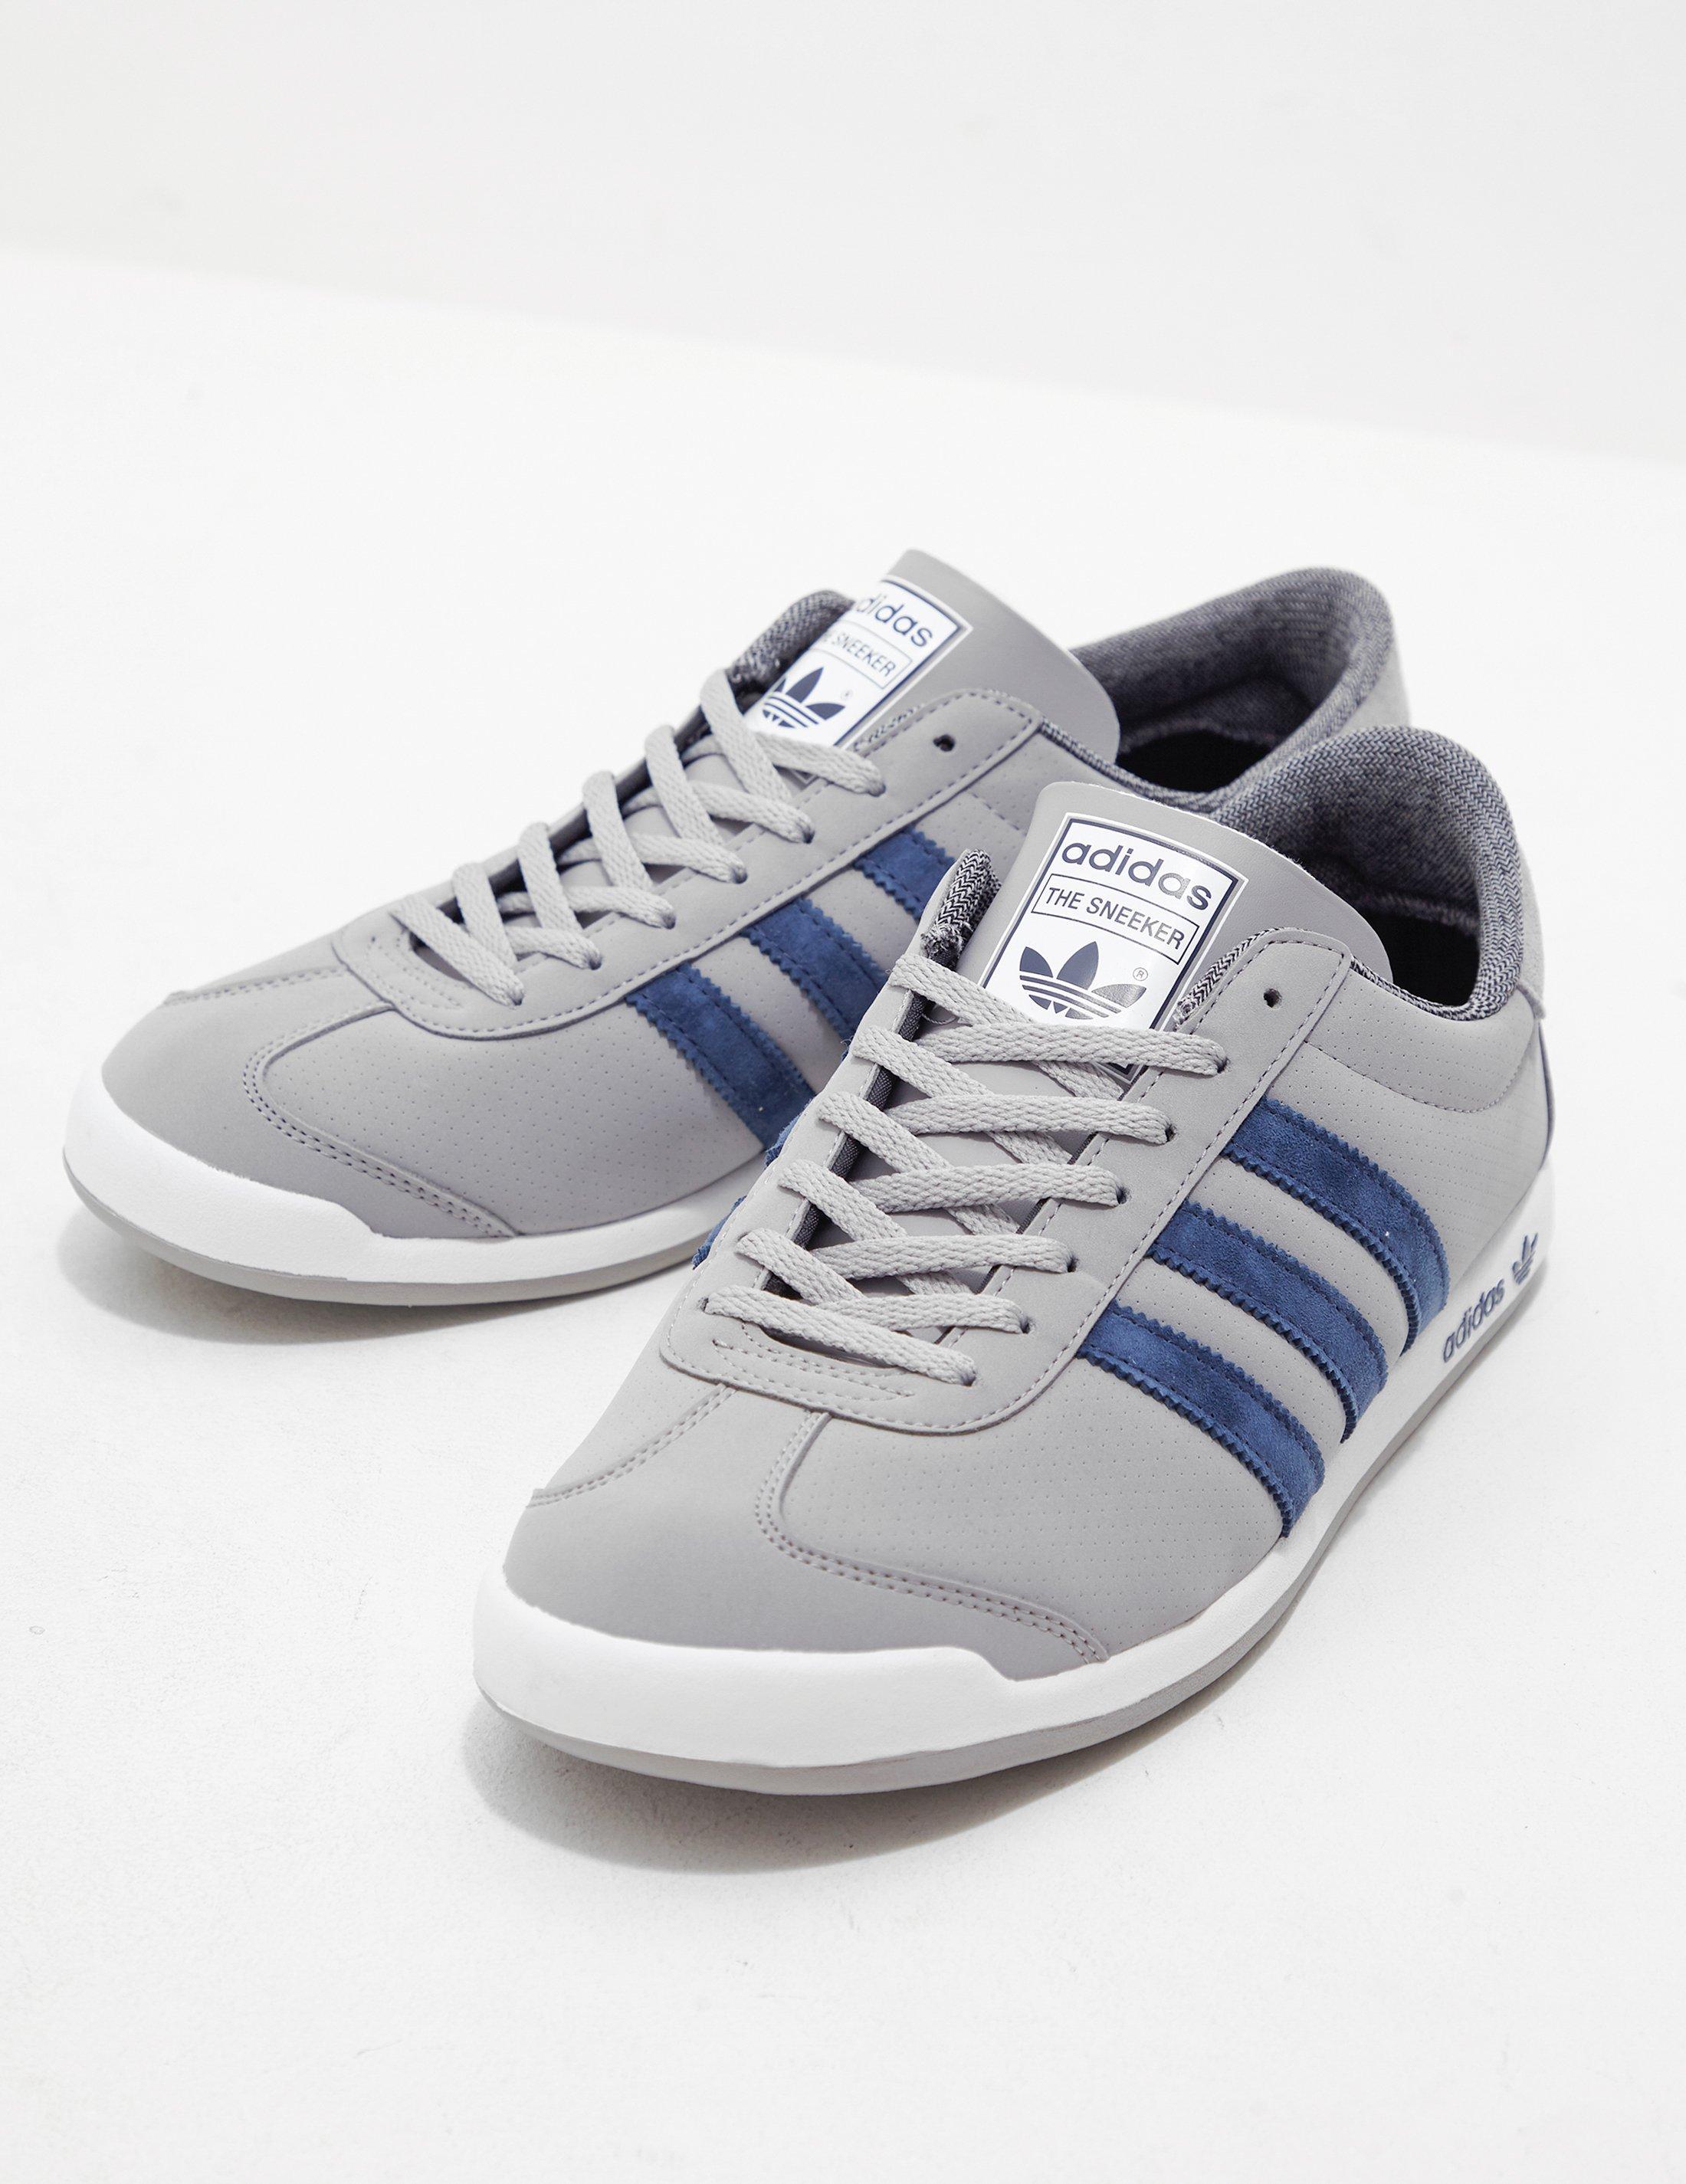 adidas Originals Leather The Sneeker - Exclusively To Tessuti Grey in ...